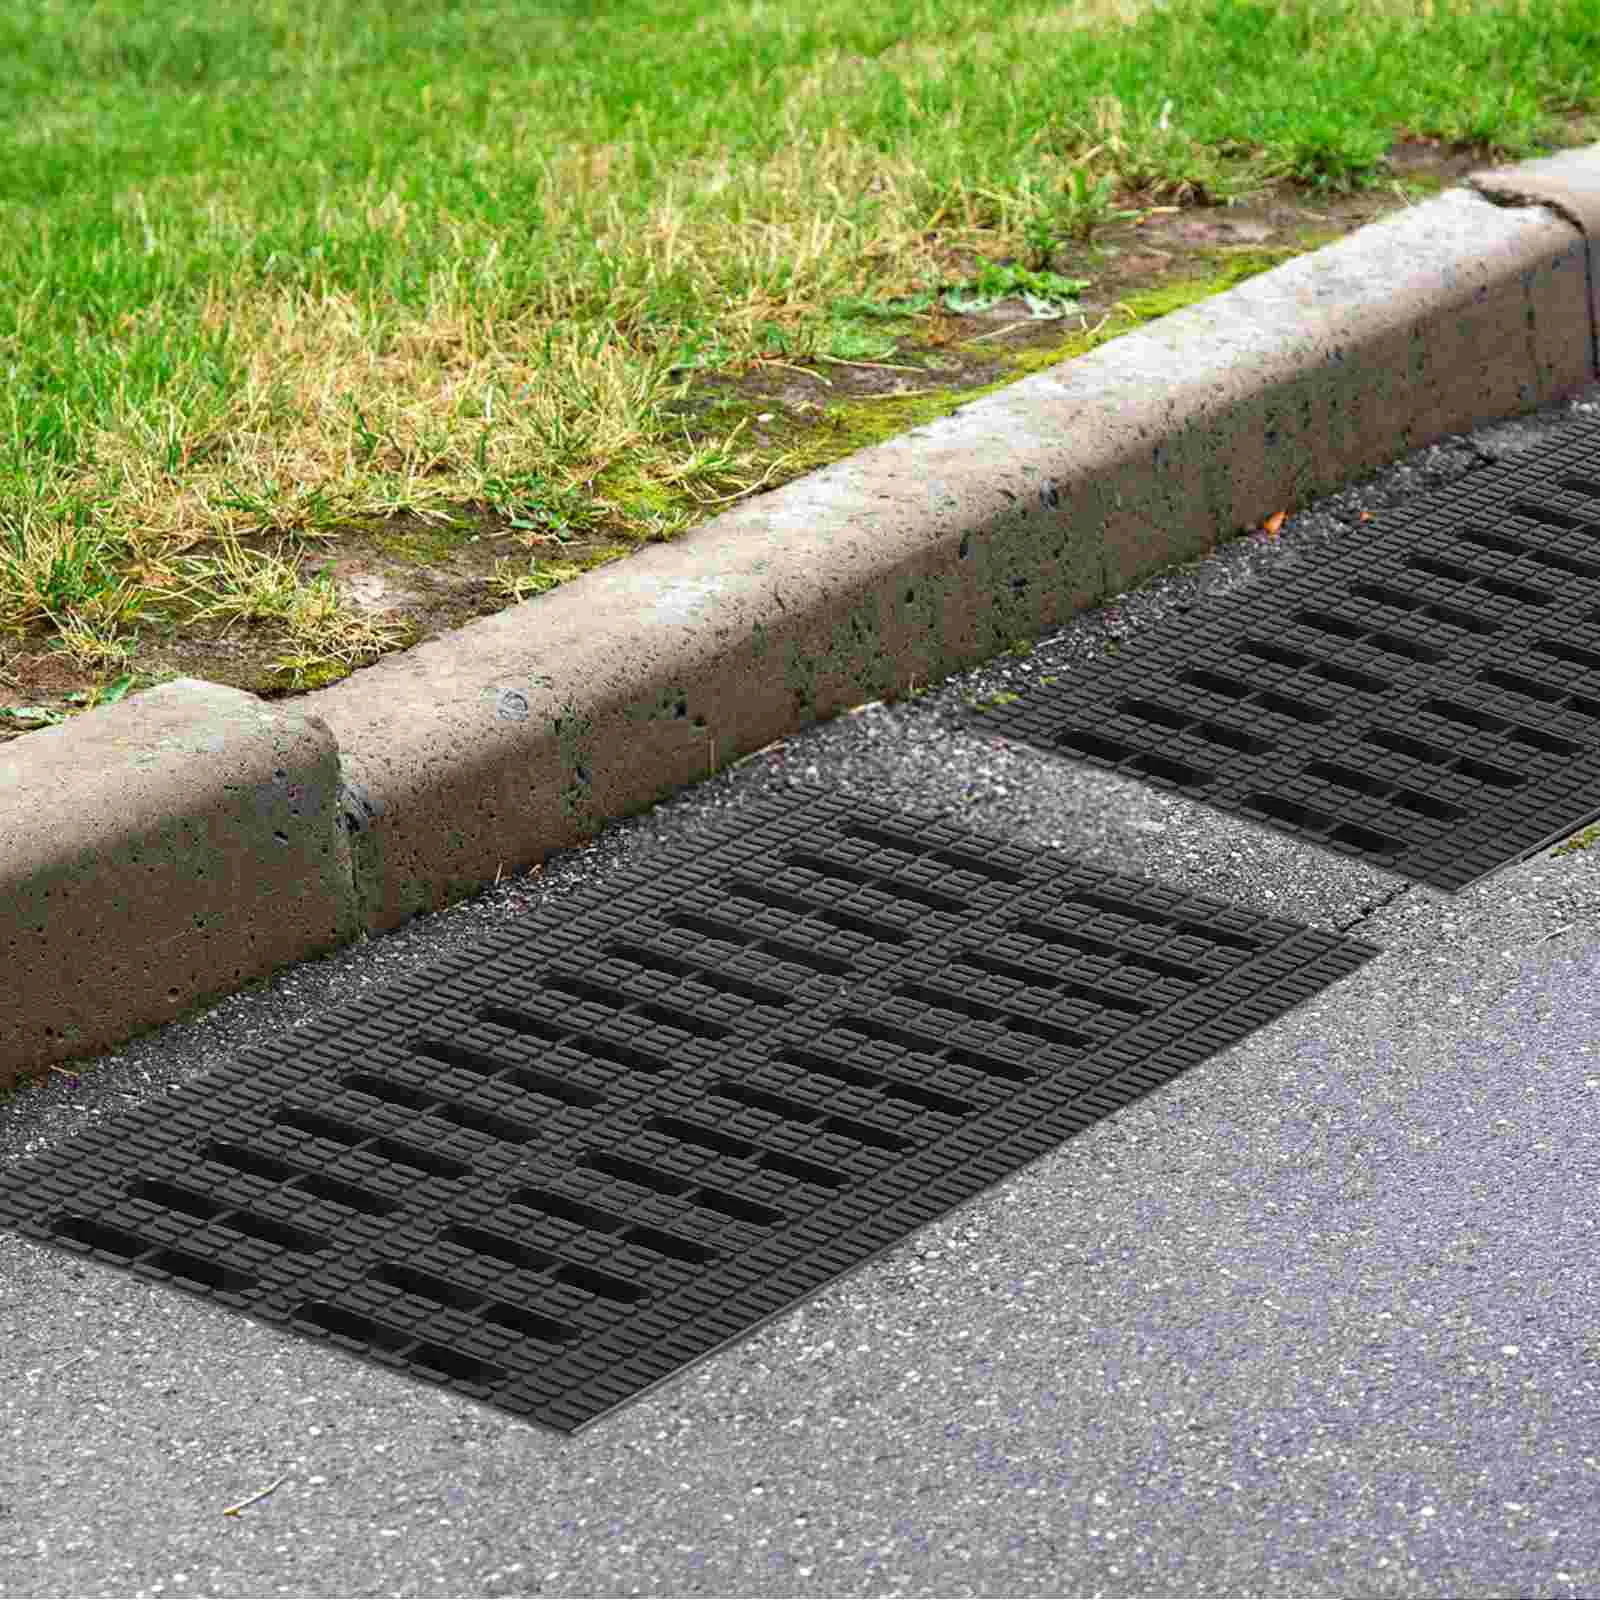 

Drain Grate Plastic Drainage Grate Kitchen Sewer Grate Cover Channel Grid Grate Bathroom Floor Drainage Linear Waste Drain